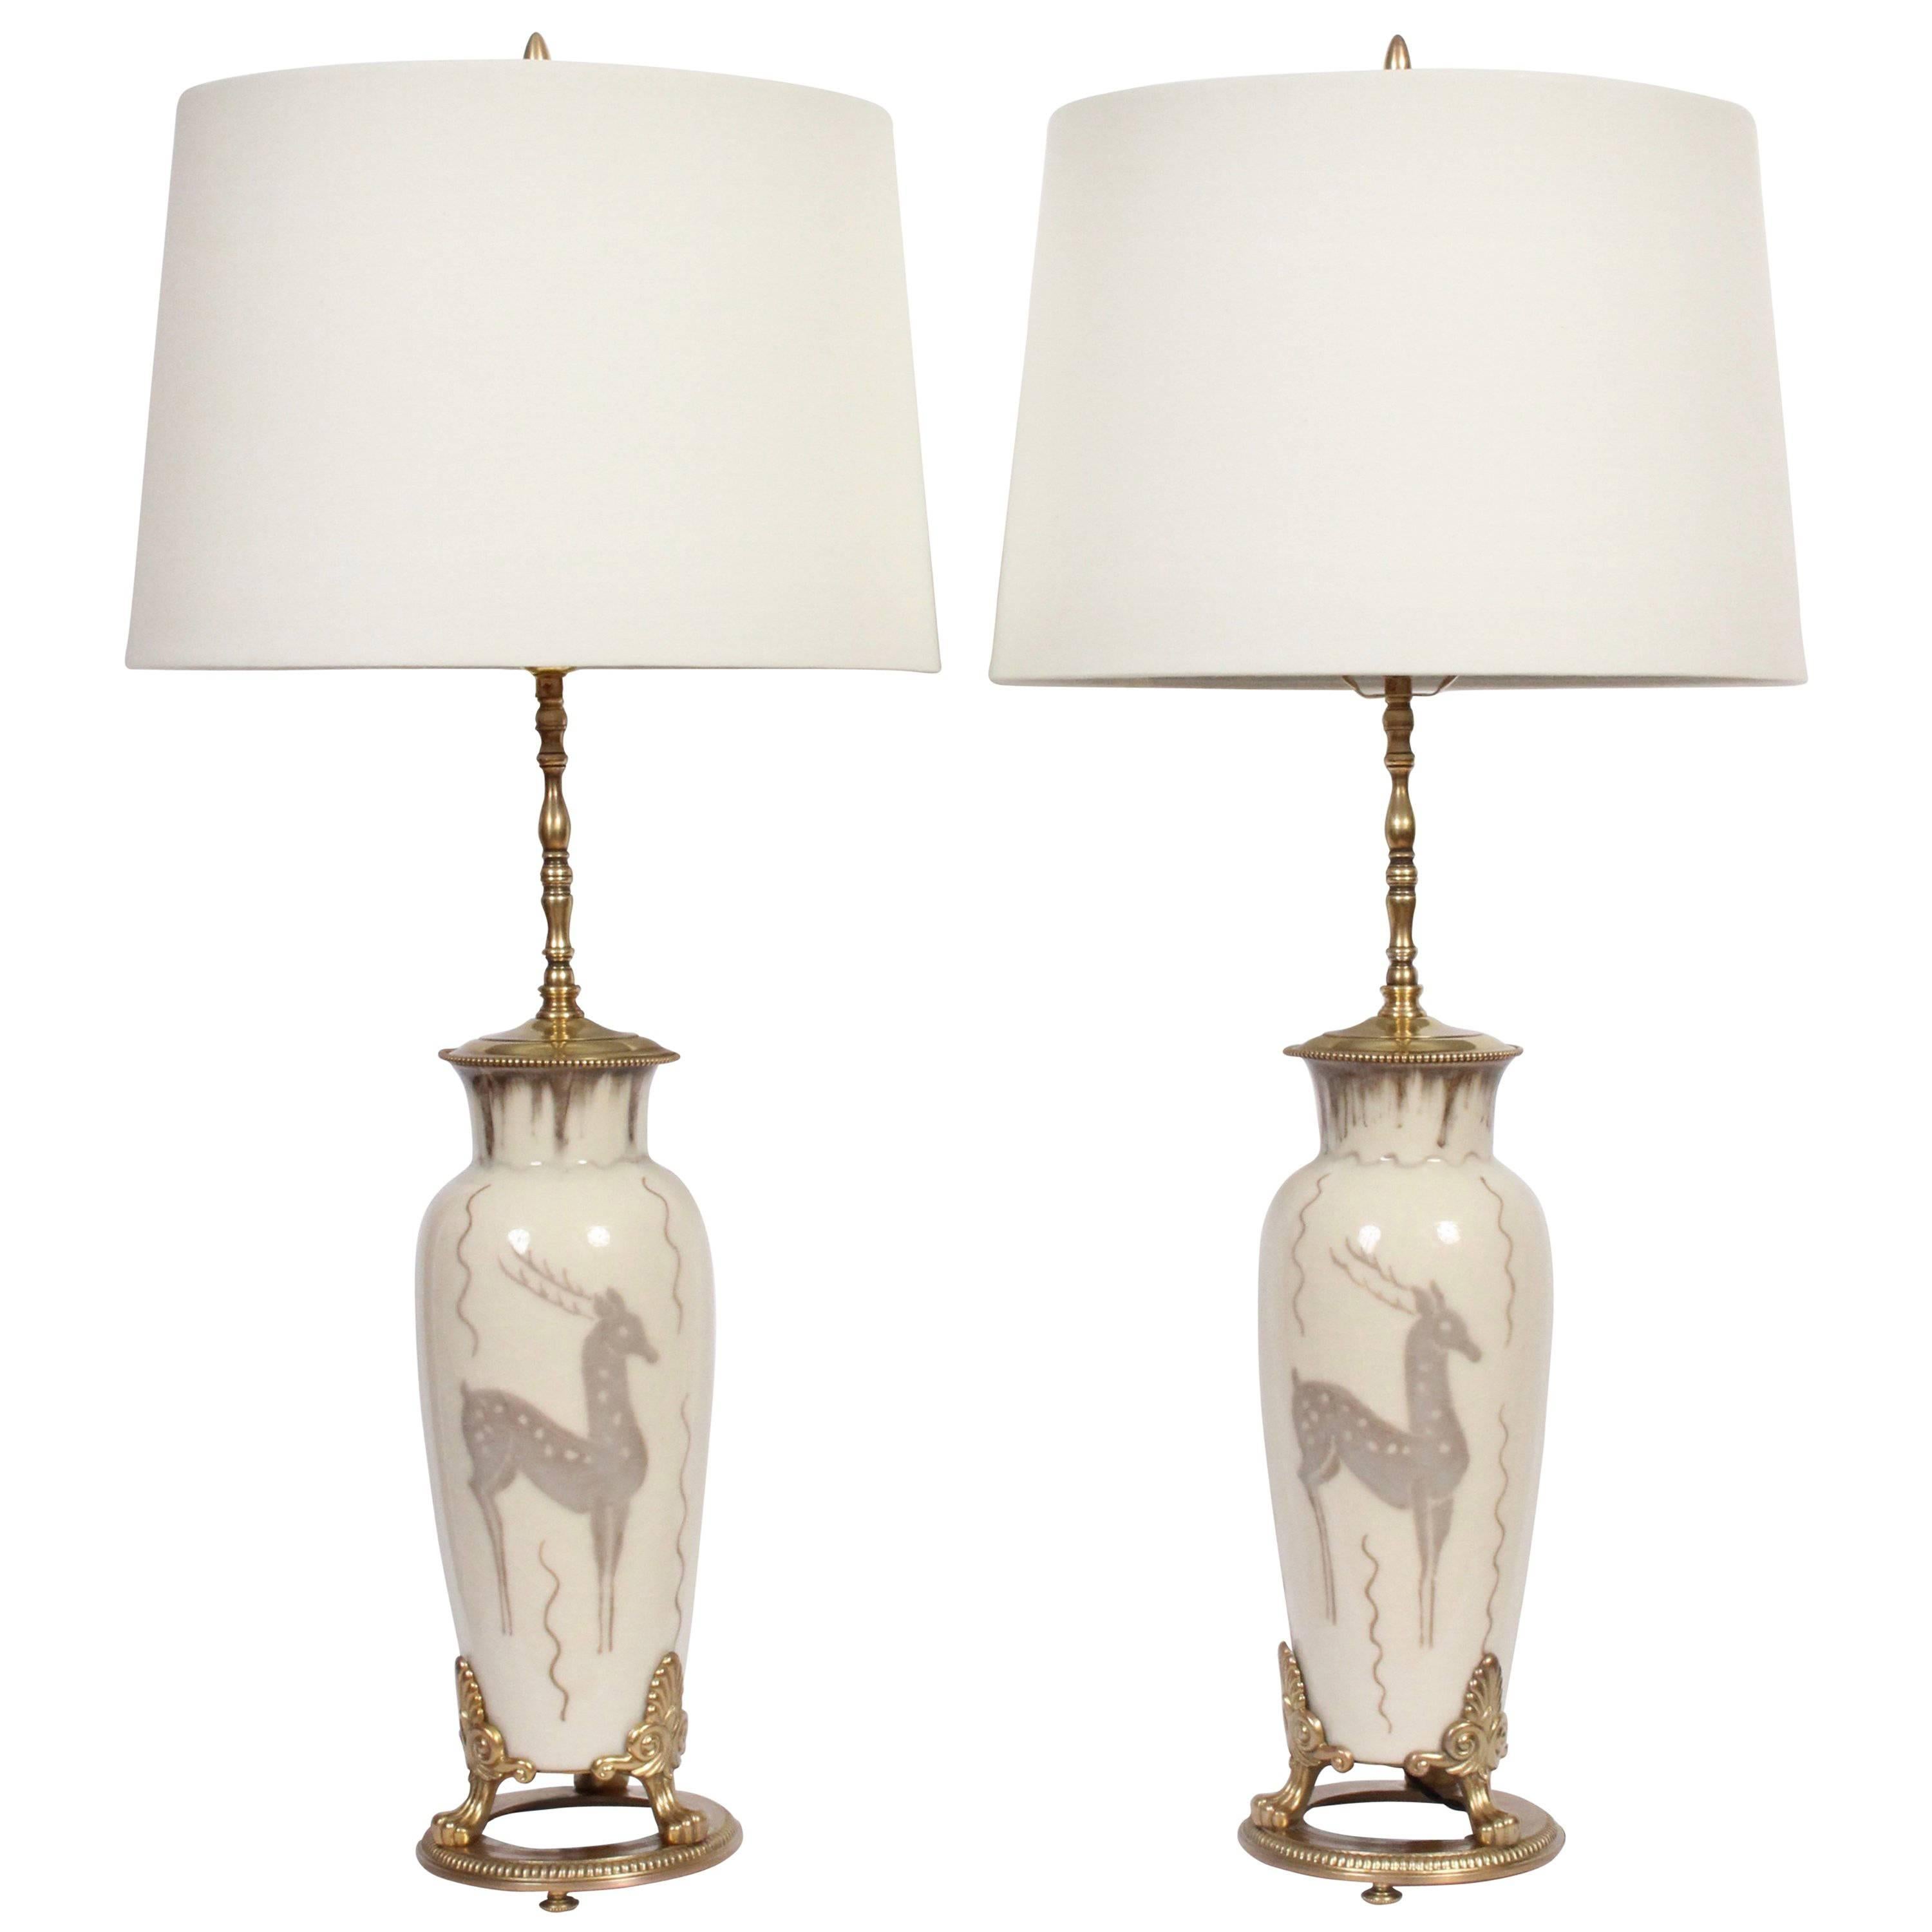 Monumental Pair of Loretta Holtkamp for Rookwood Pottery "Stag" Table Lamps 1949 For Sale